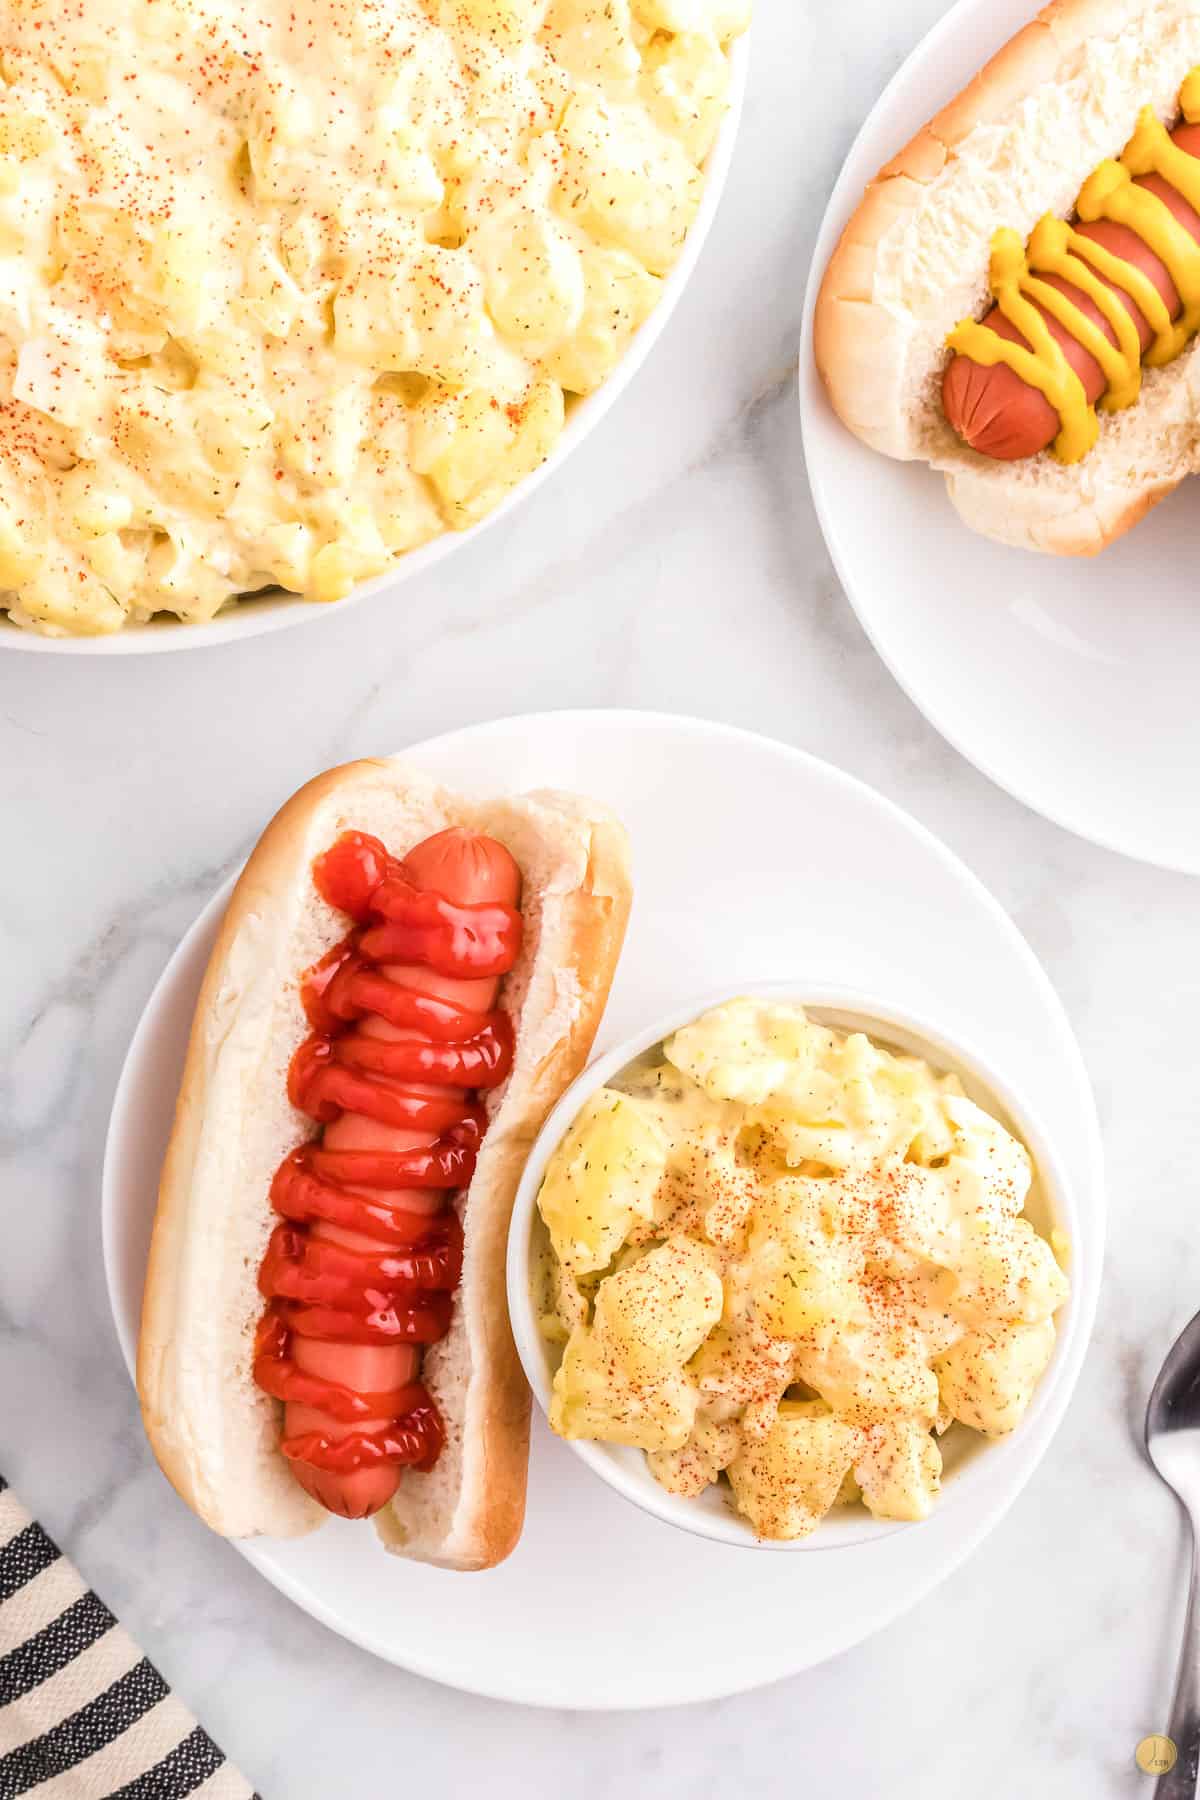 bowl of potato salad on a plate with a hot dog dressed with ketchup